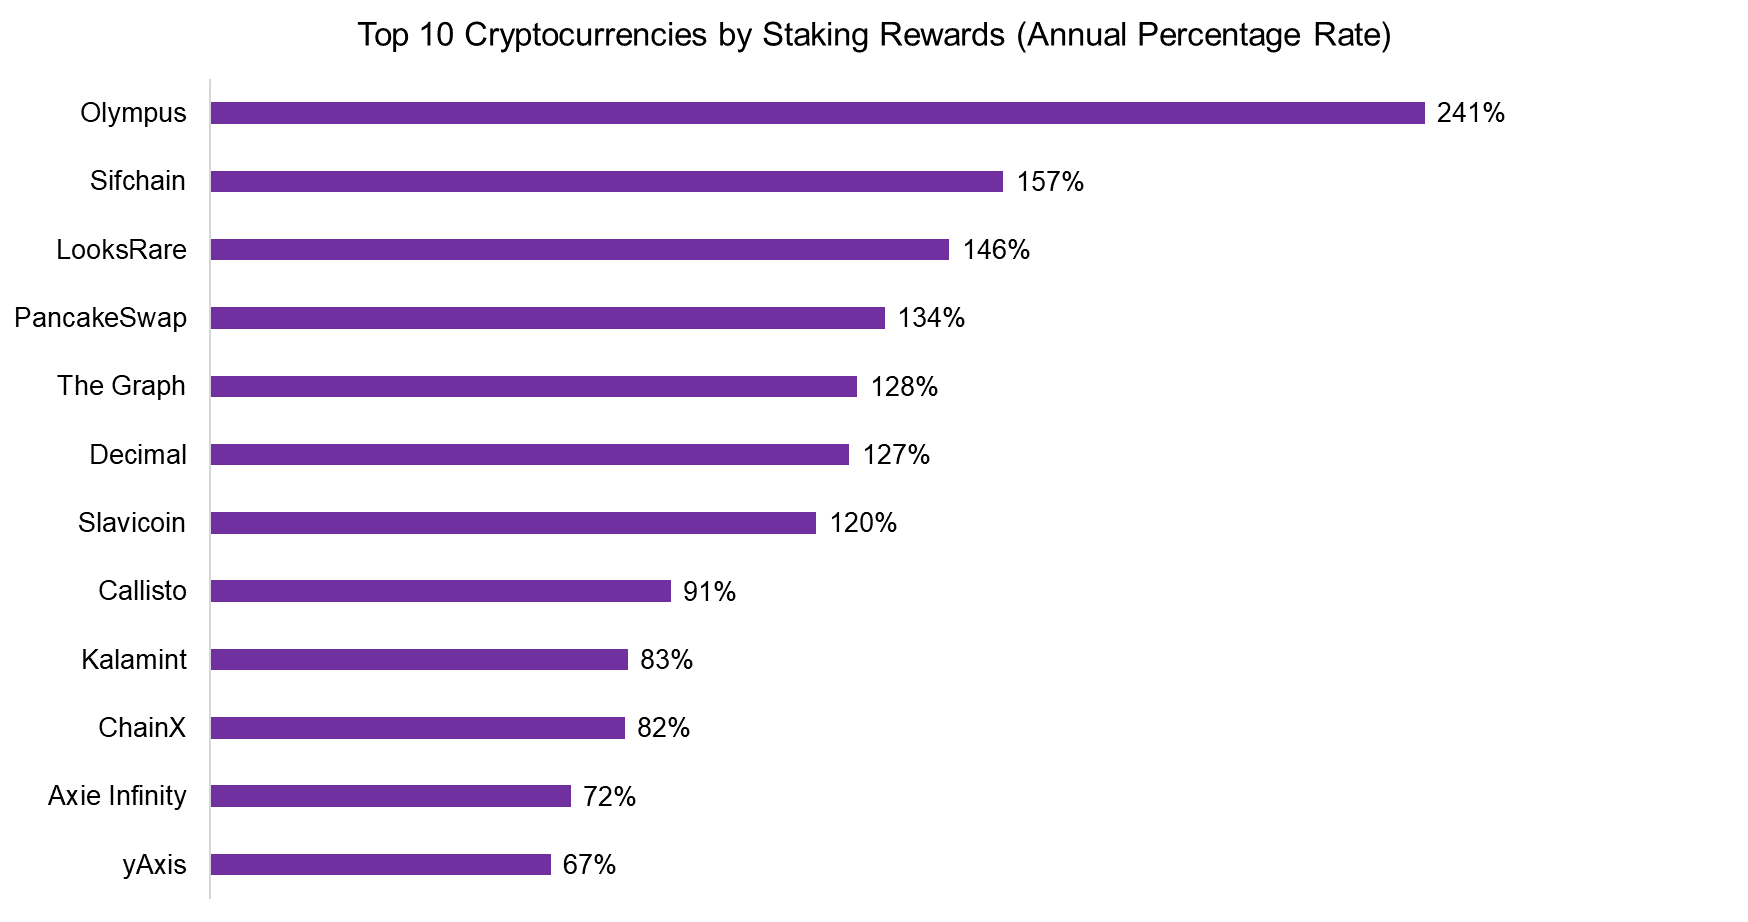 Top 10 Cryptocurrencies by Staking Rewards (Annual Percentage Rate)